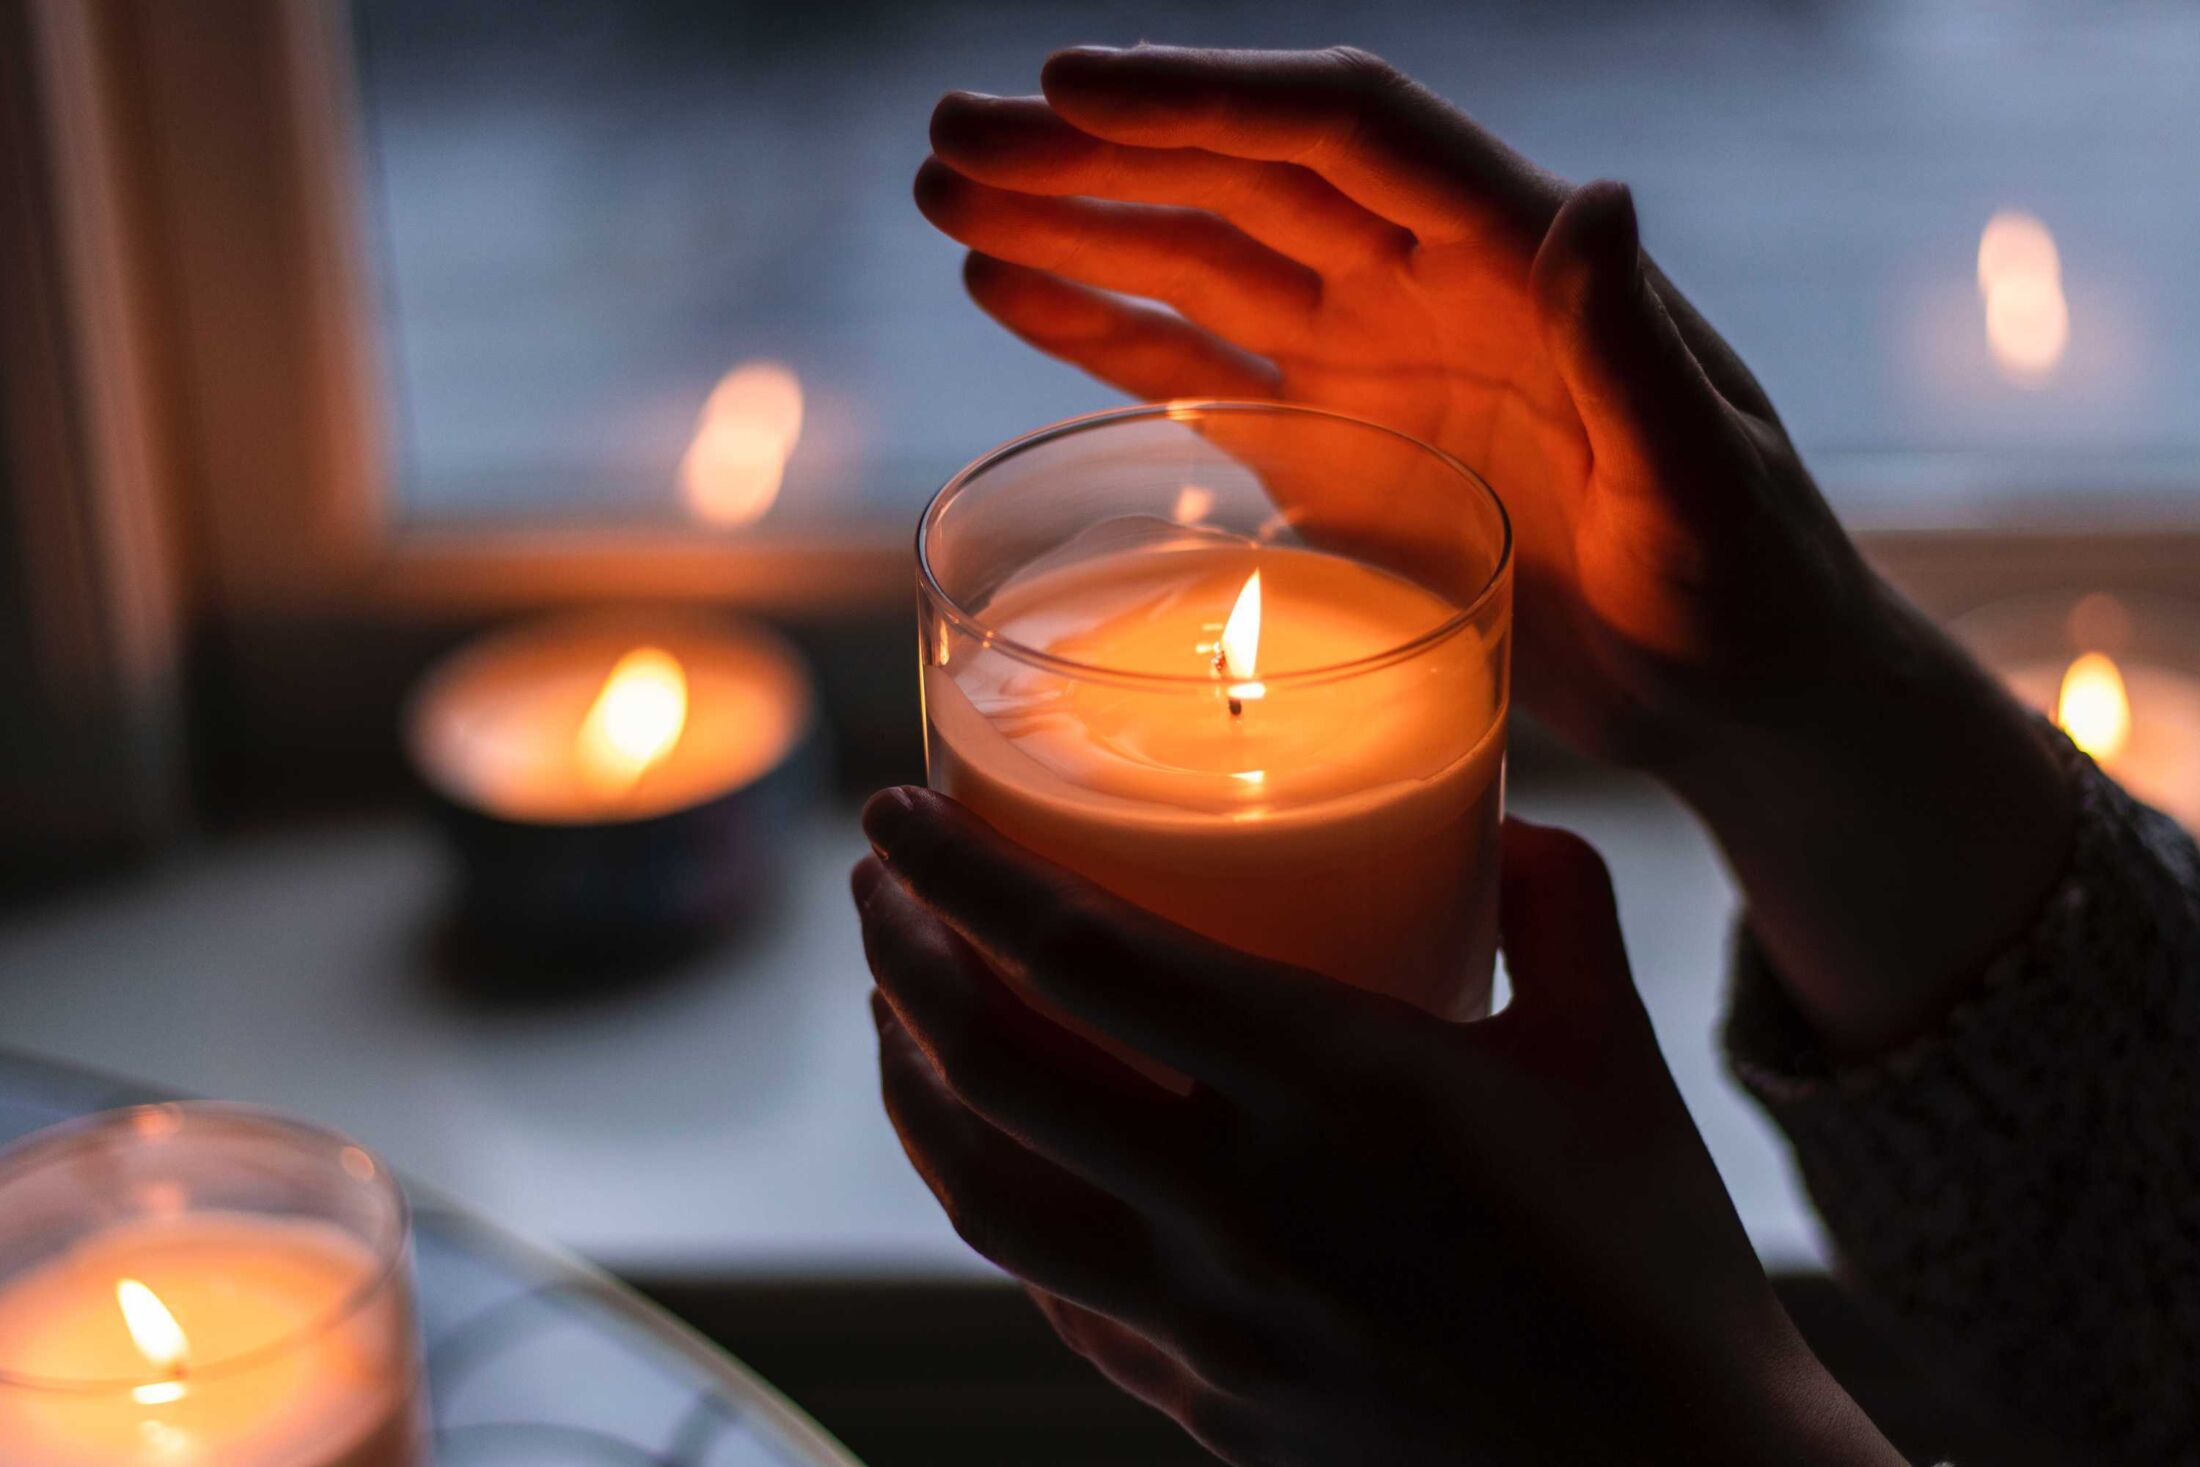 A hand hovers near a lit candle 